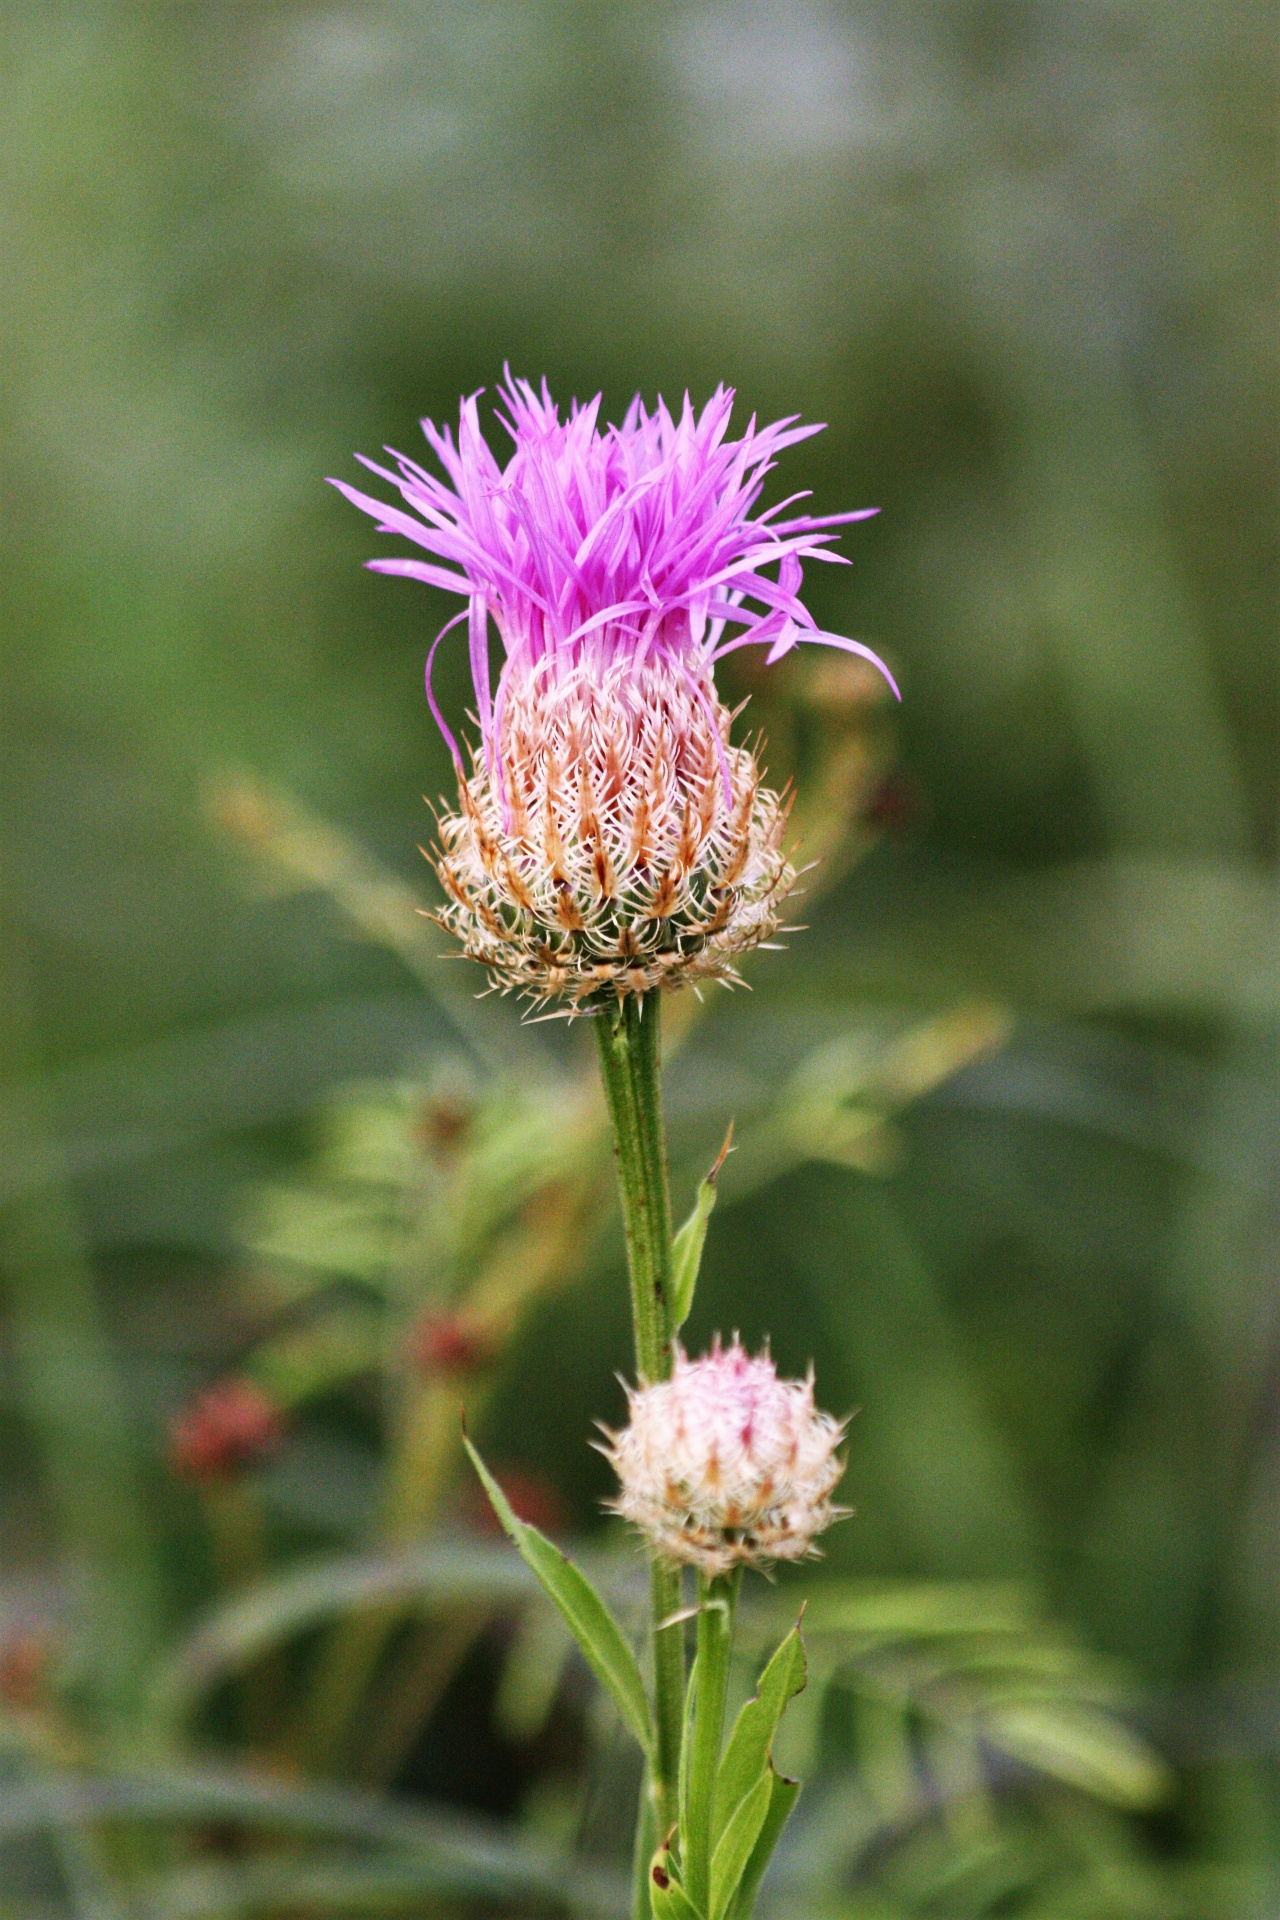 Close-up of a single purple American basket wildflower on a blurred green background.